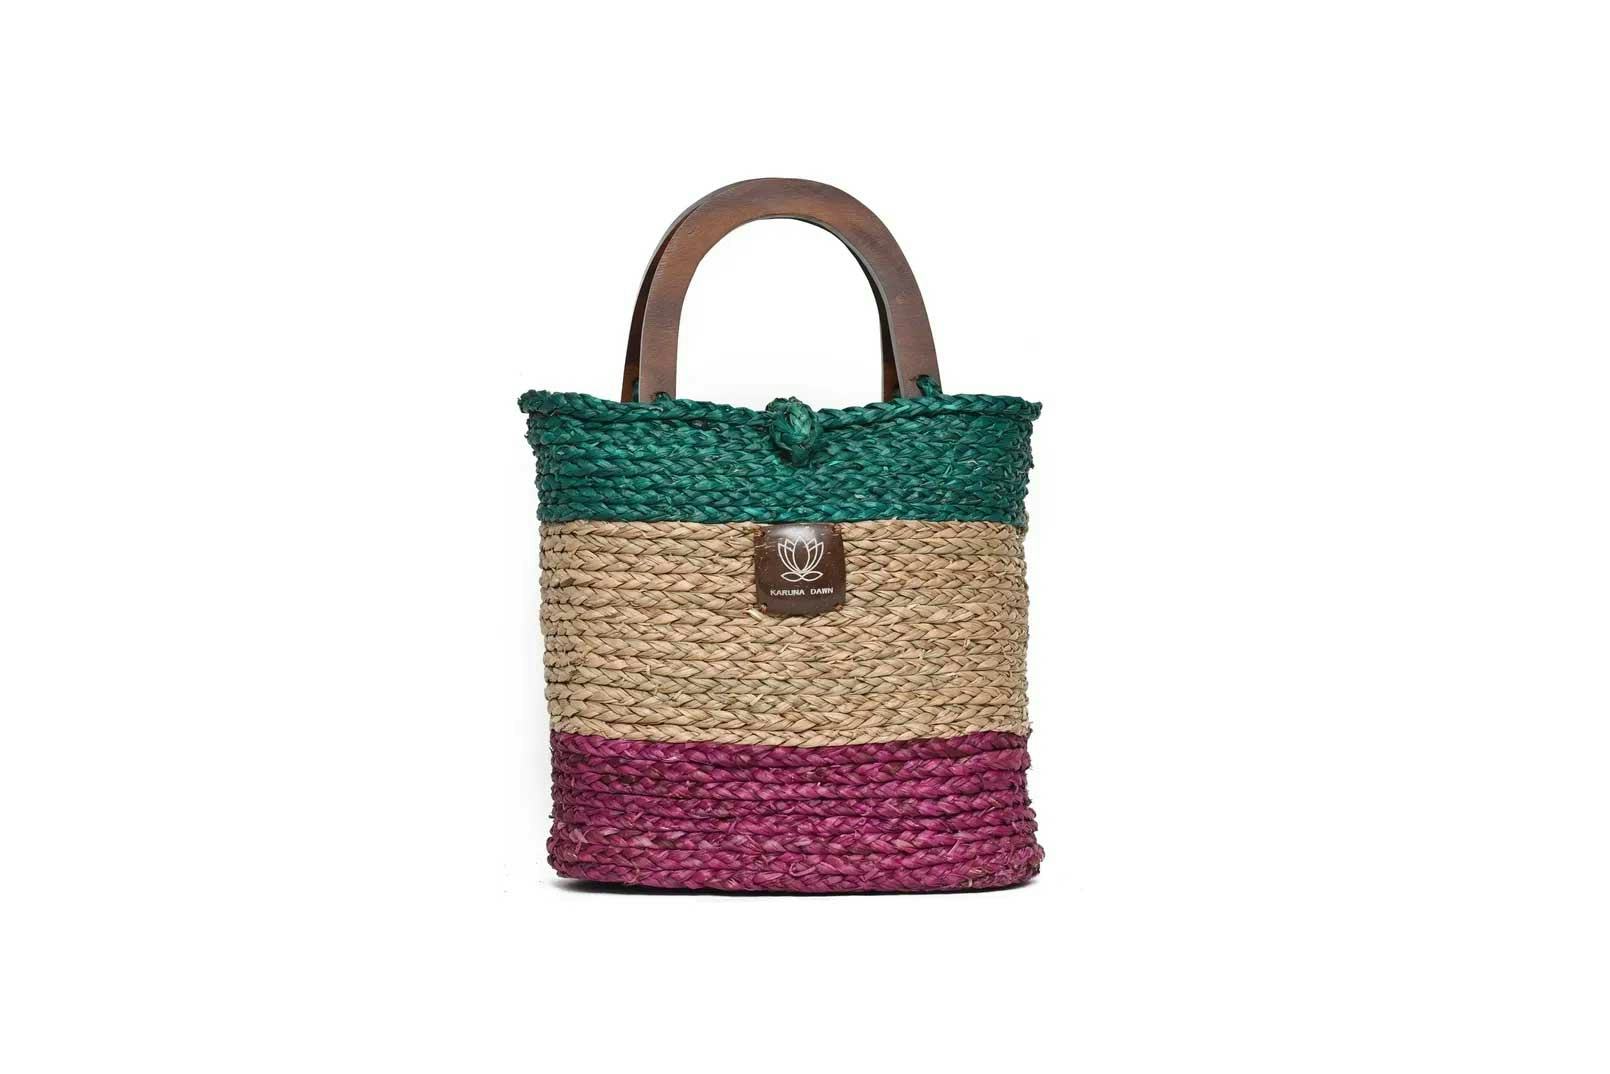 Wooden Handle Bag - Sea Green Turquoise, Natural & Pink